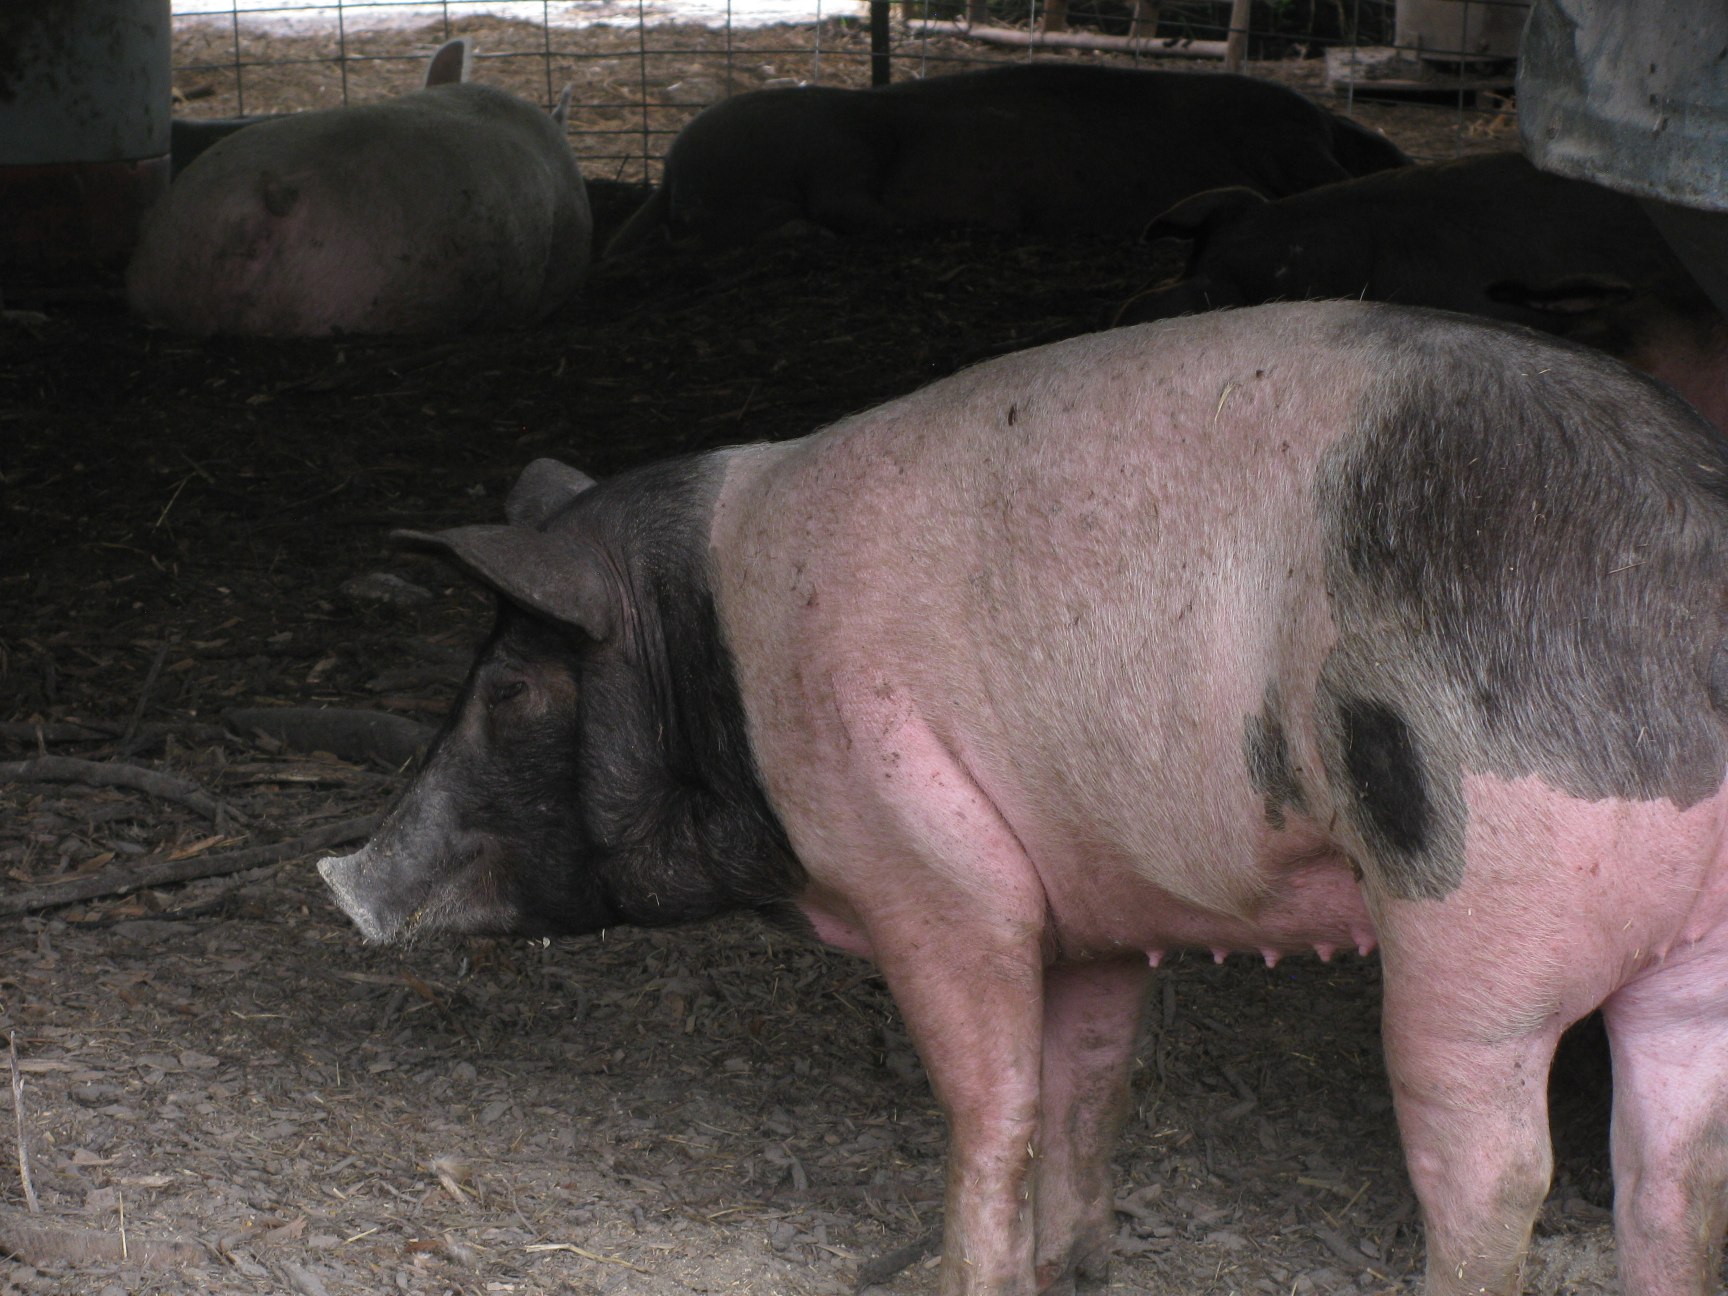 several pigs and cows in their pen at a fair